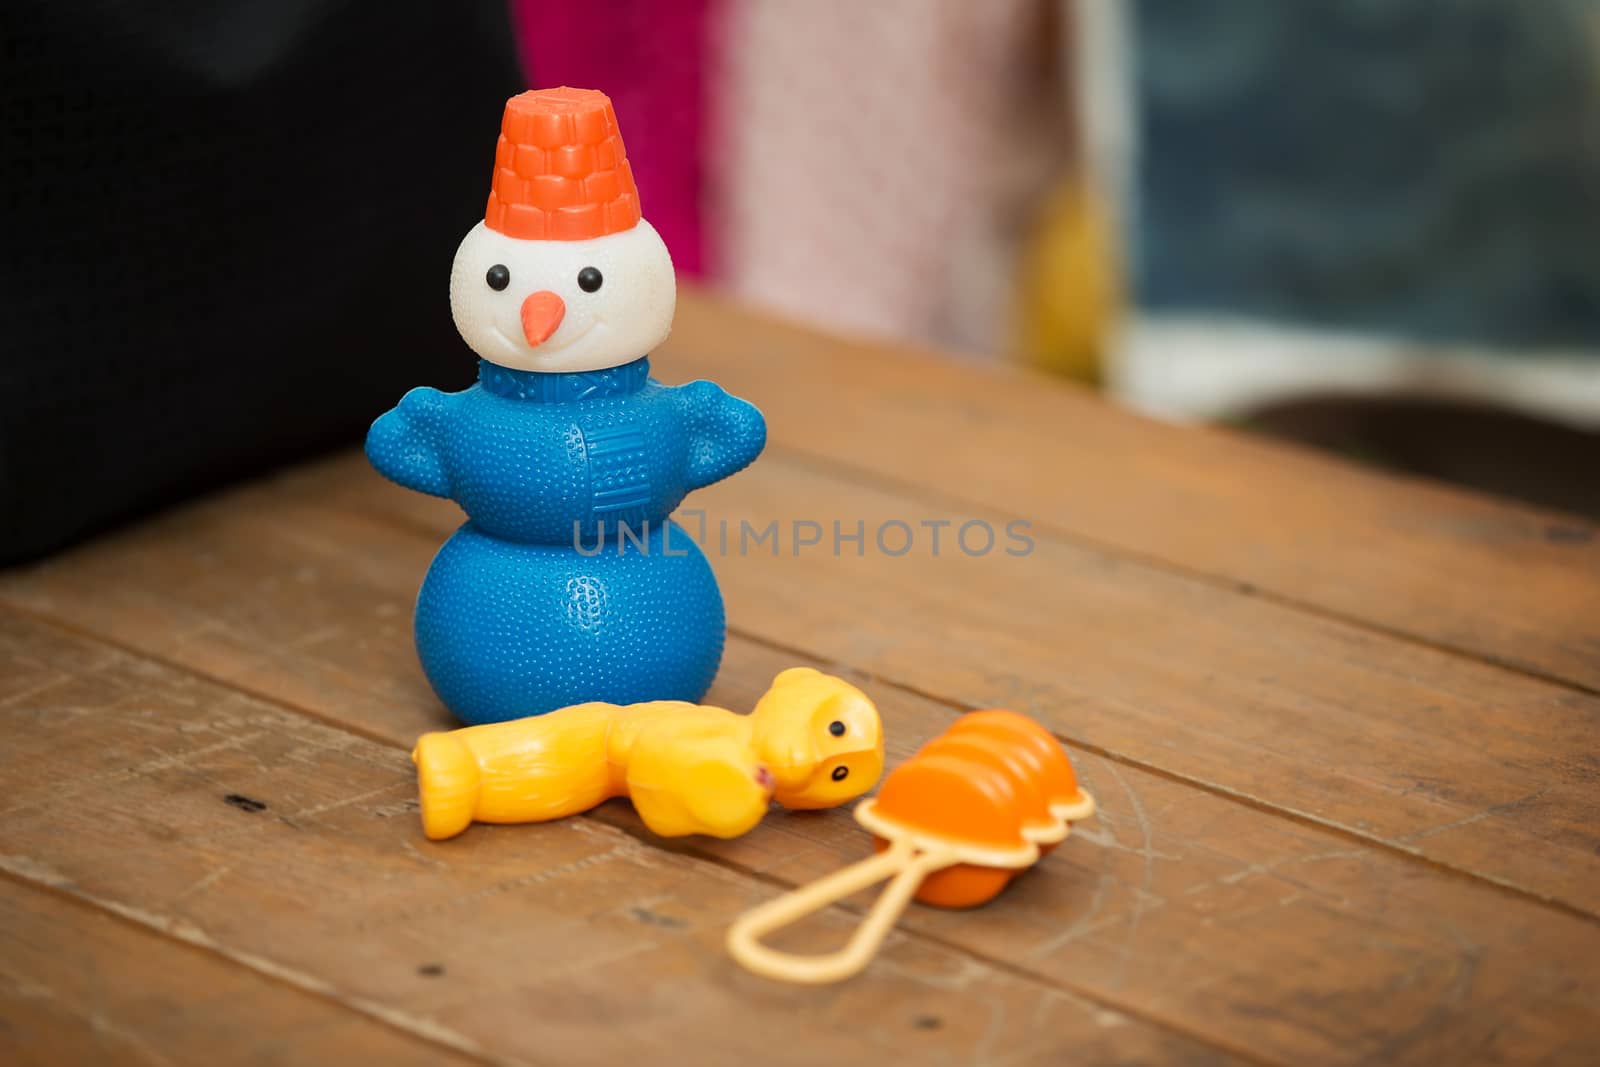 Old Soviet toys are a snowman, a monkey and a rattle. Retro Toys